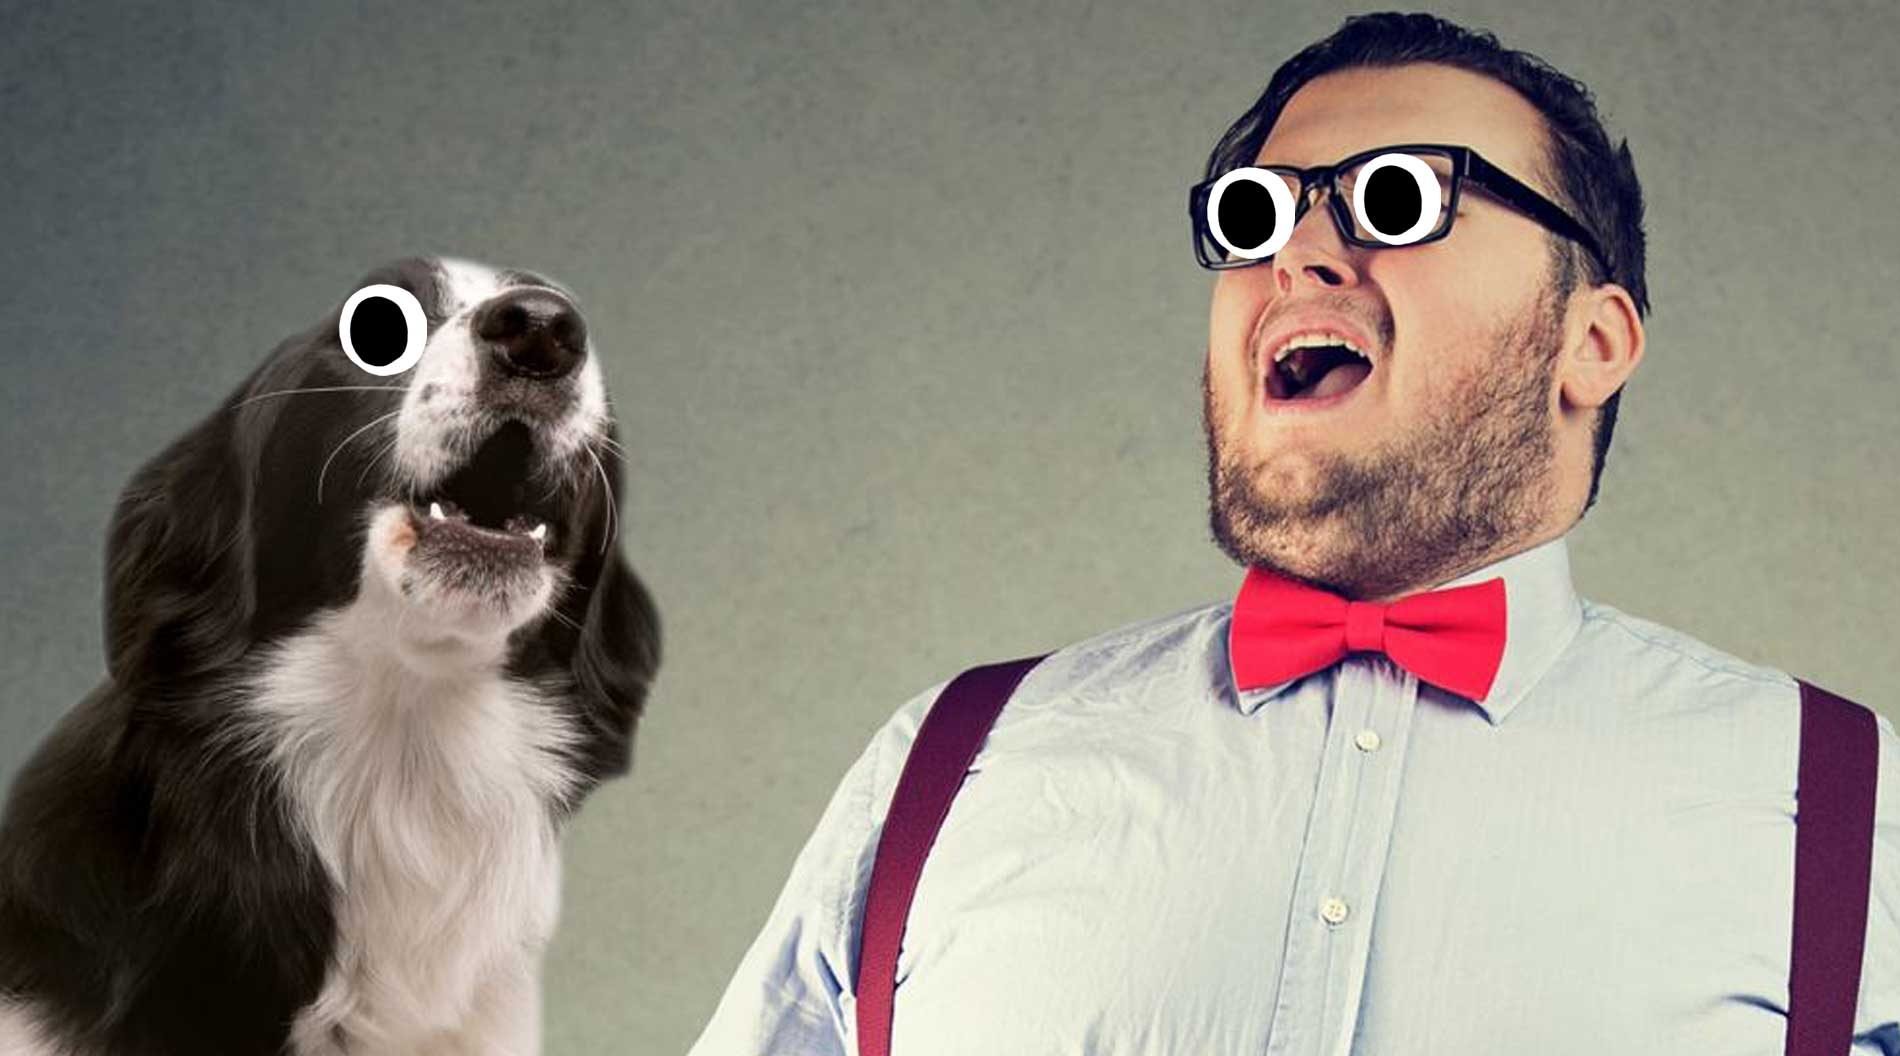 A singing dog and man joining in